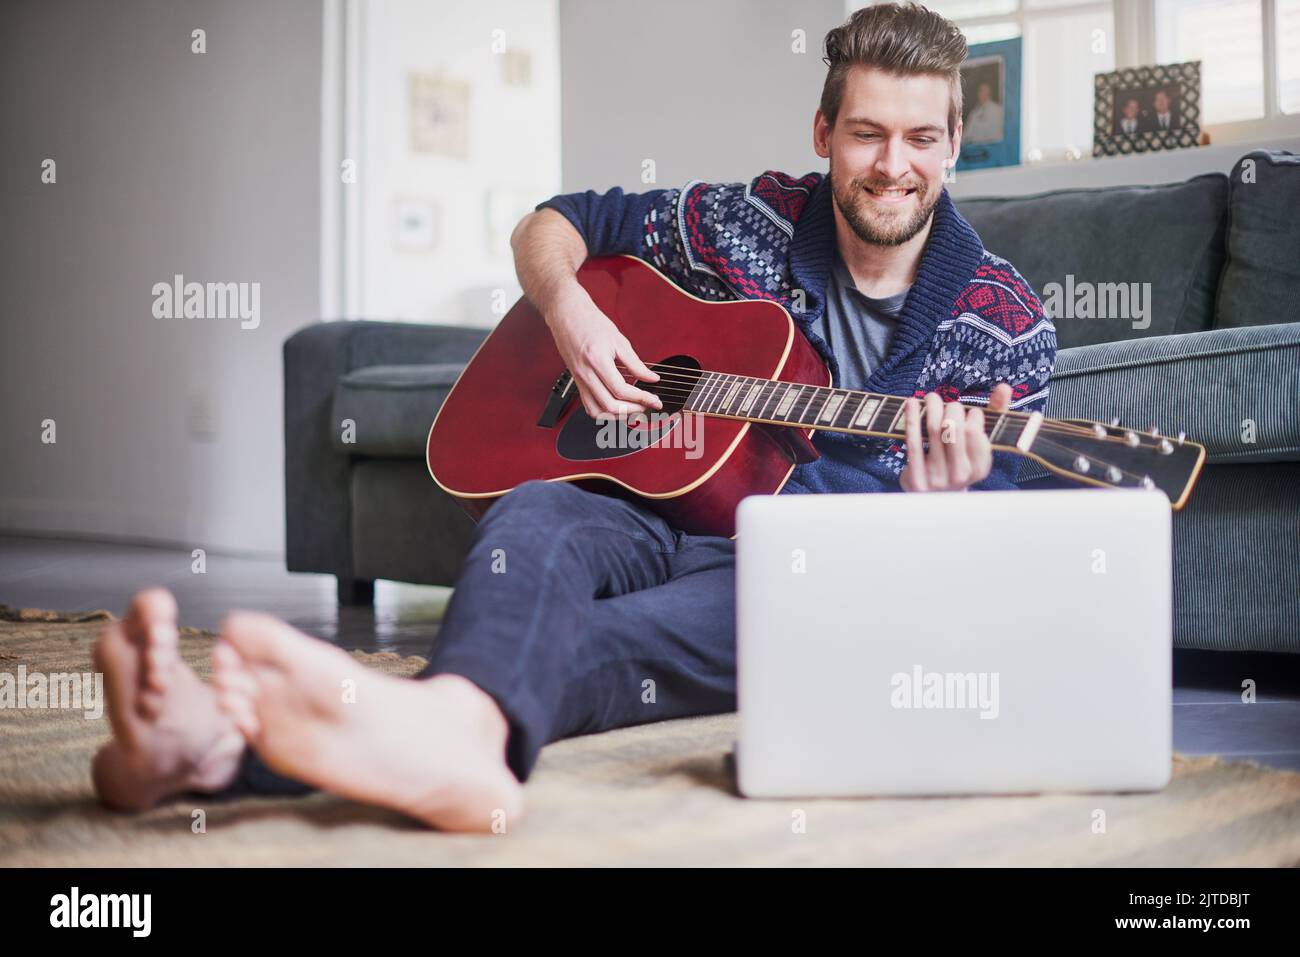 Hes found an easy tutorial to follow online. a handsome young man playing a guitar while watching an online tutorial on his laptop. Stock Photo